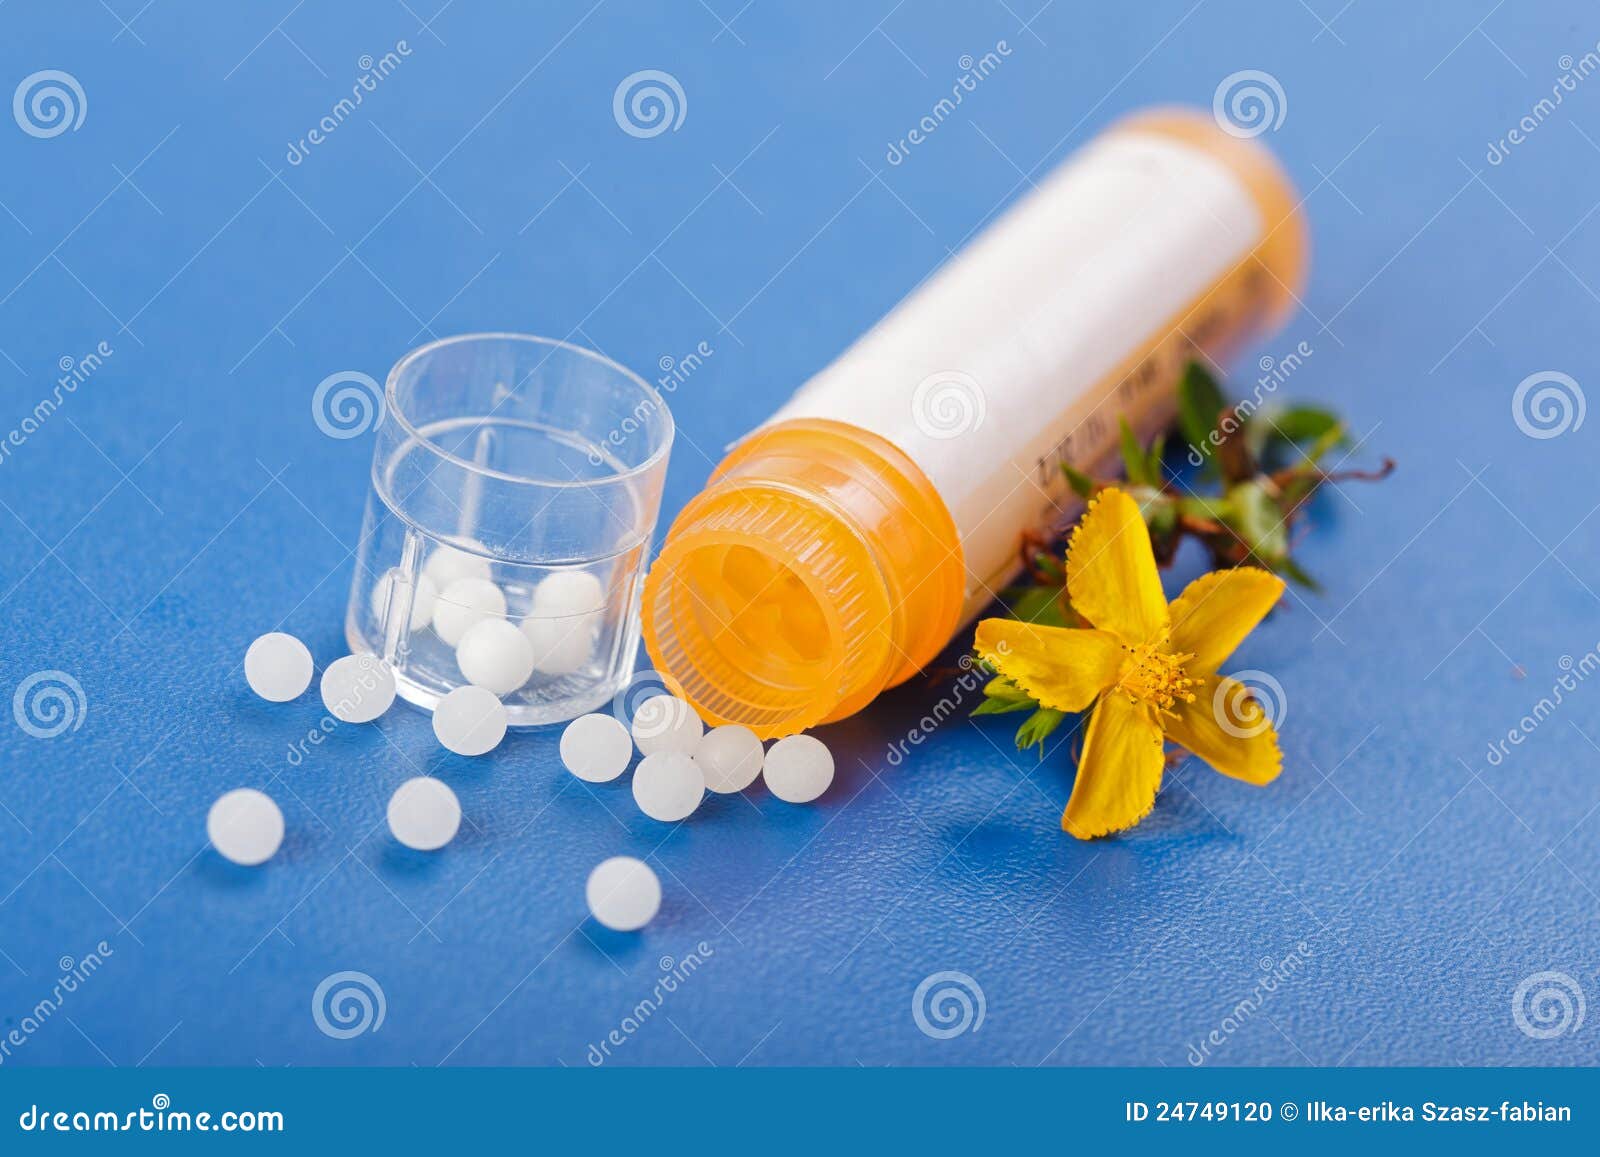 homeopathic pills and hypericum